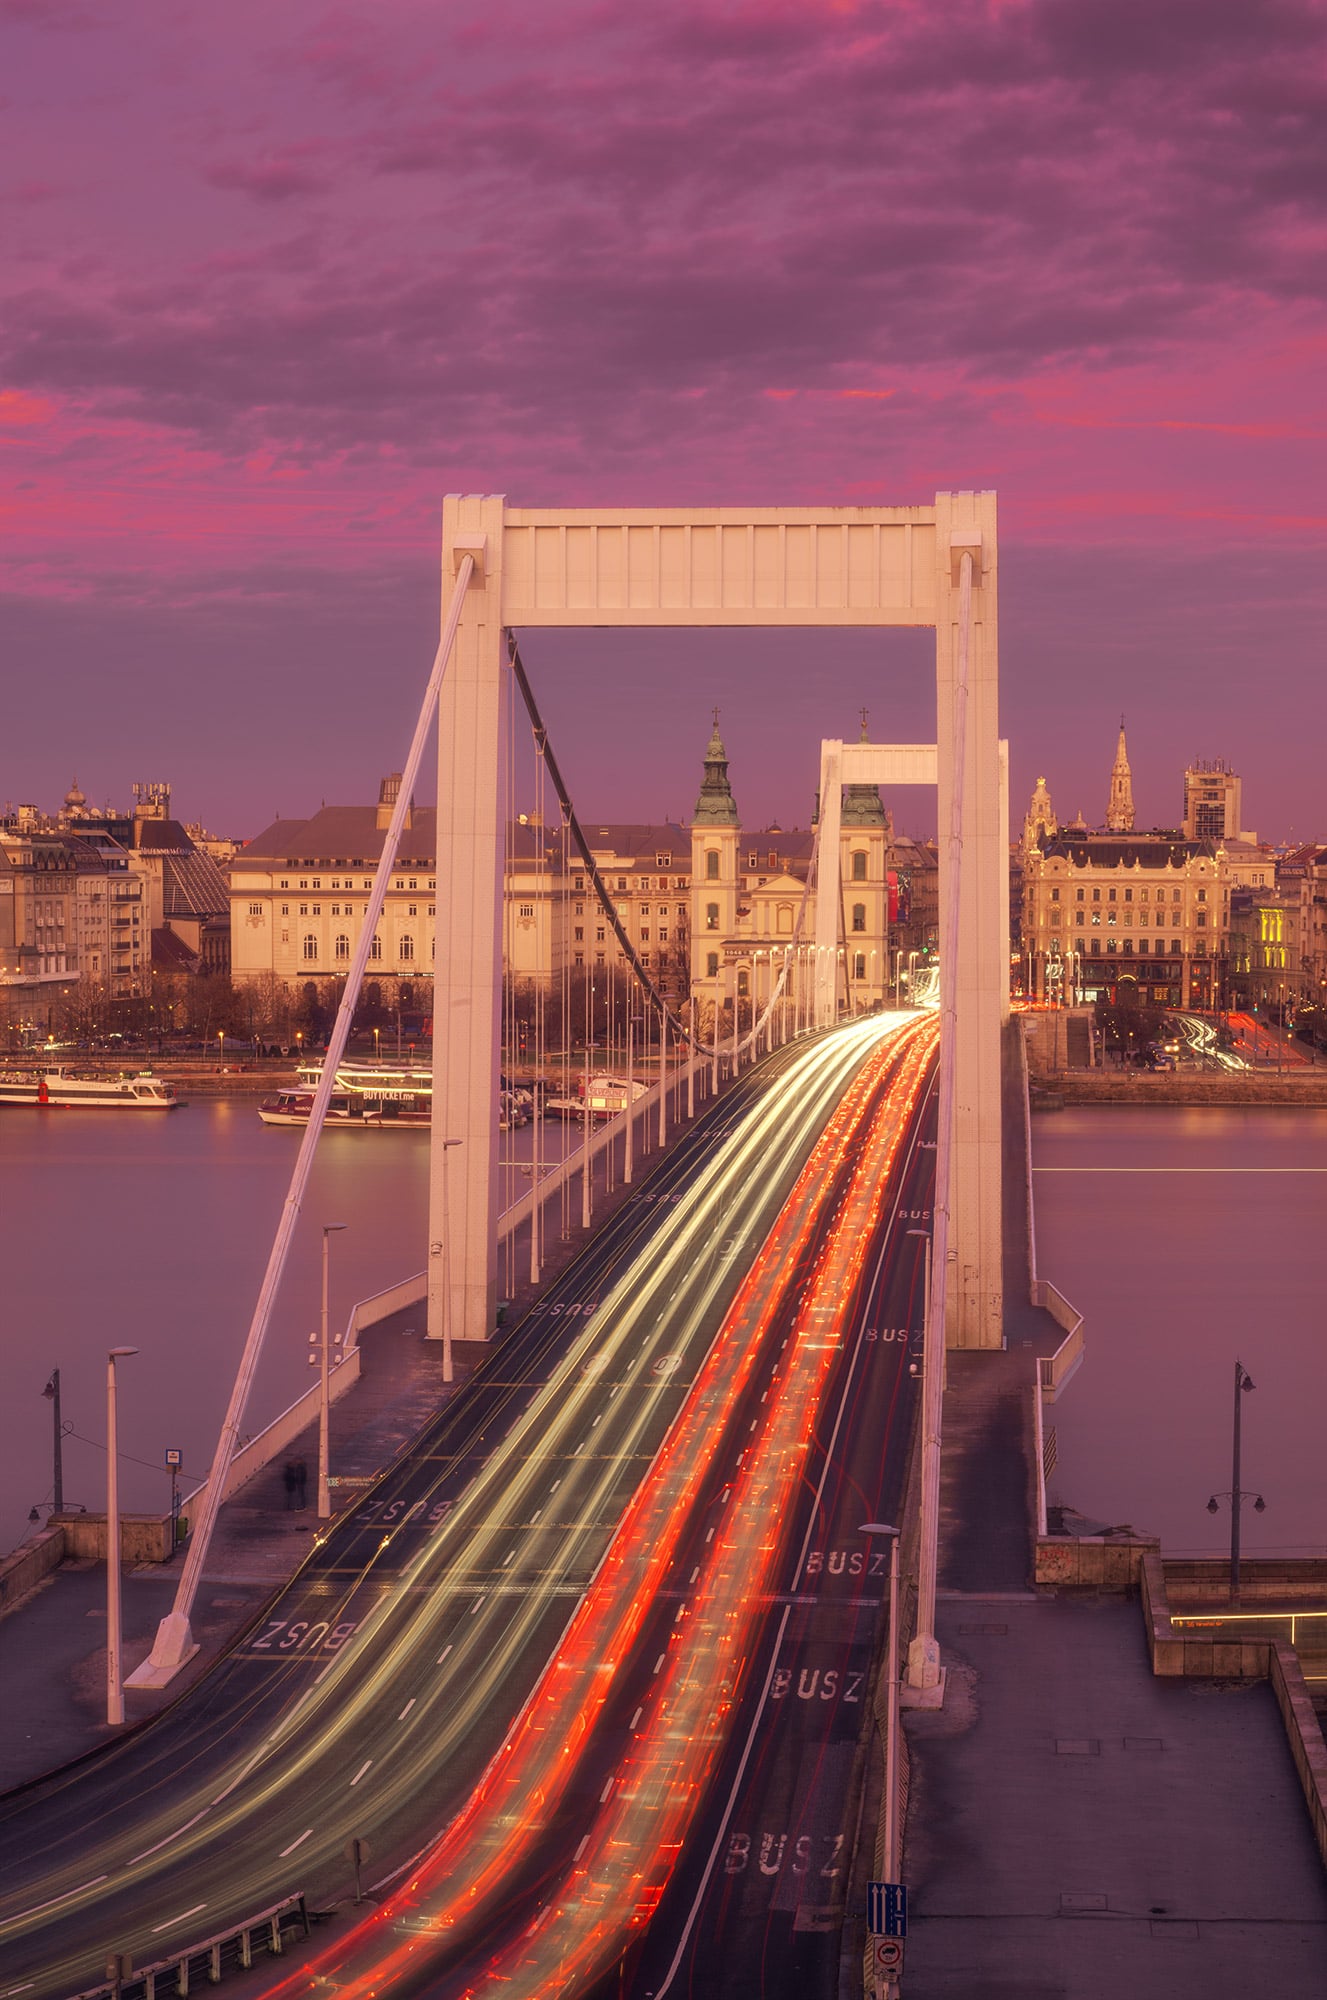 Behold the majestic Elizabeth Bridge in Budapest, captured in vertical photography at sunset by travel photographer Jennifer Esseiva using her Nikon Z8. The warm hues of the setting sun cast a golden glow over the iconic bridge, illuminating the cityscape with a captivating brilliance. From the intricate architectural details to the tranquil waters of the Danube River below, this stunning image encapsulates the timeless beauty and allure of Budapest's skyline. Immerse yourself in the breathtaking panorama of the Hungarian capital through Jennifer Esseiva's lens, and experience the magic of sunset over the Elizabeth Bridge.